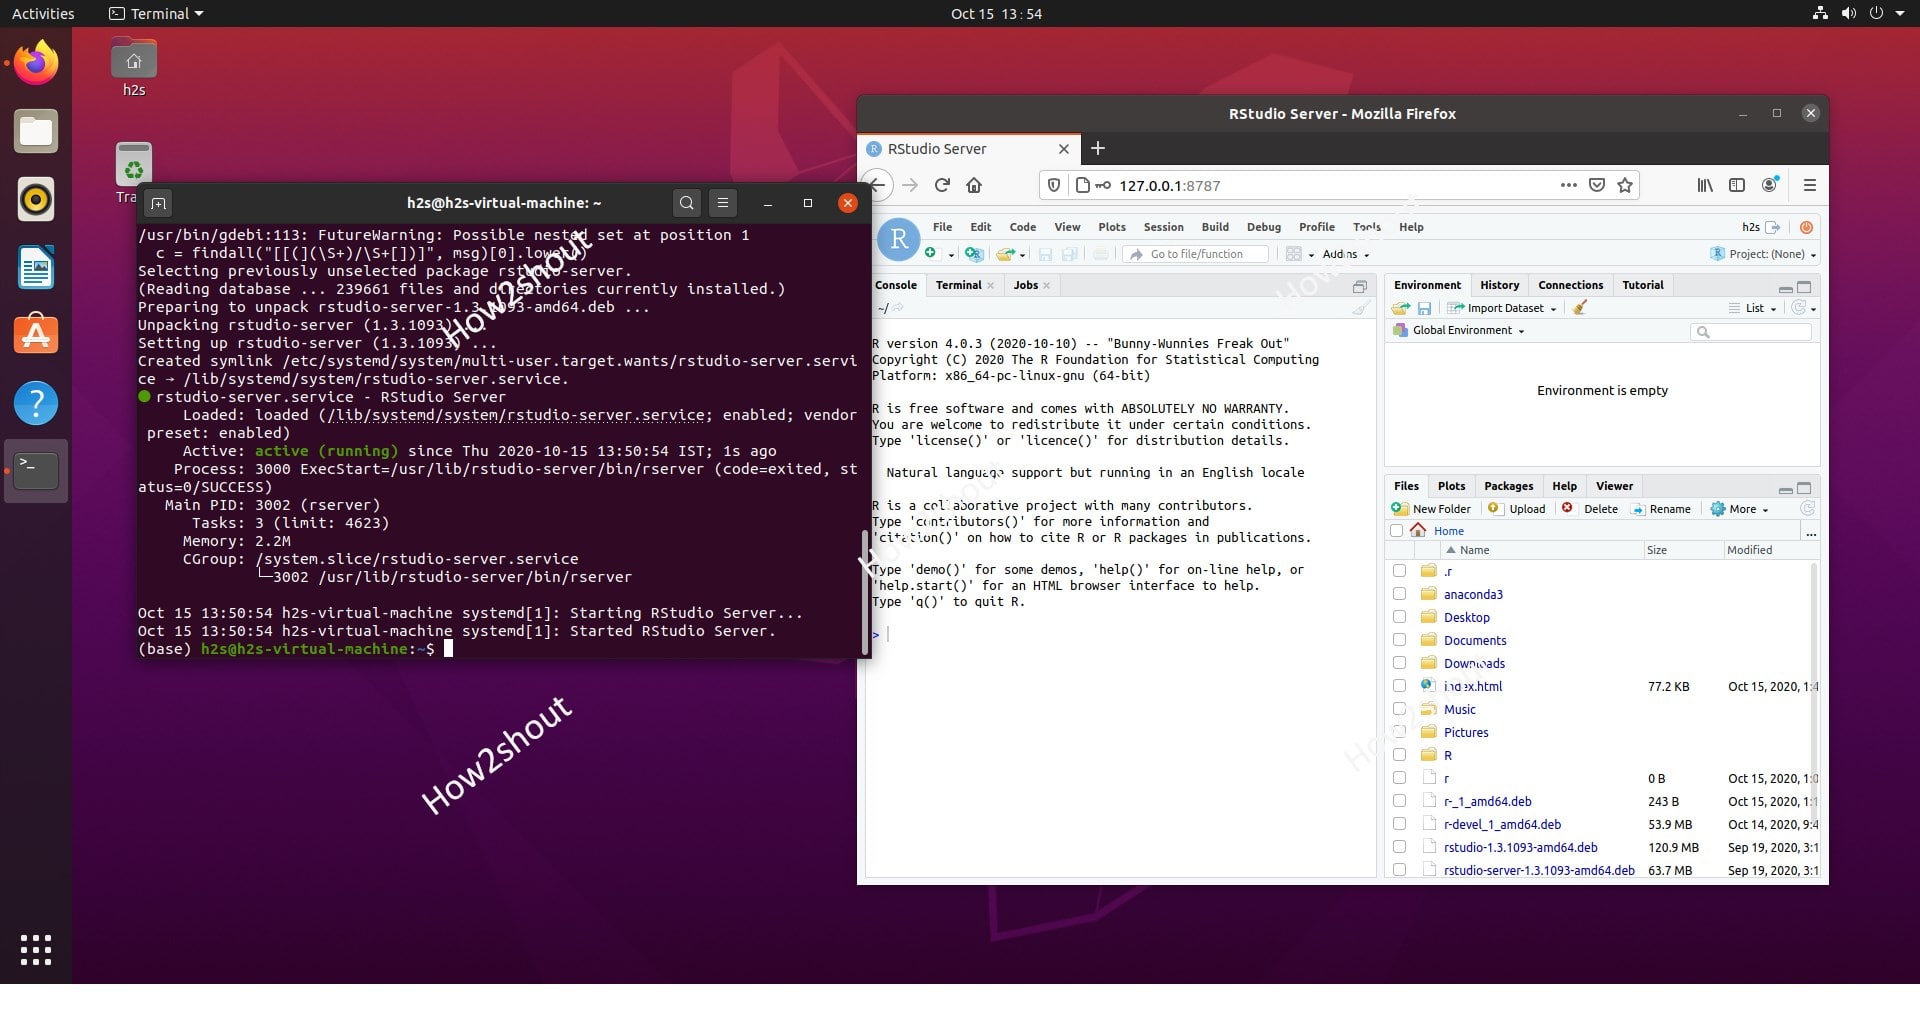 how to install ubuntu from usb